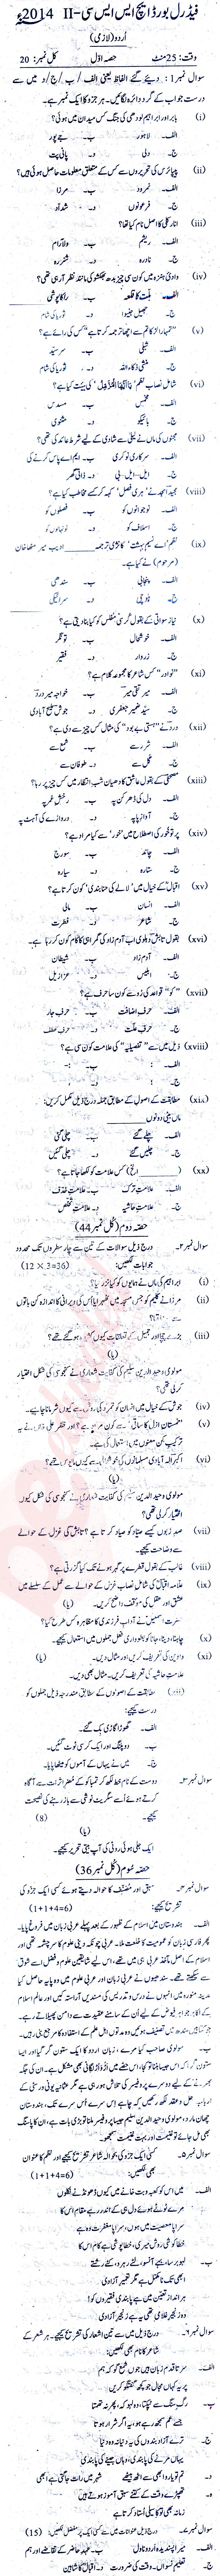 Urdu 12th class Past Paper Group 1 Federal BISE  2014